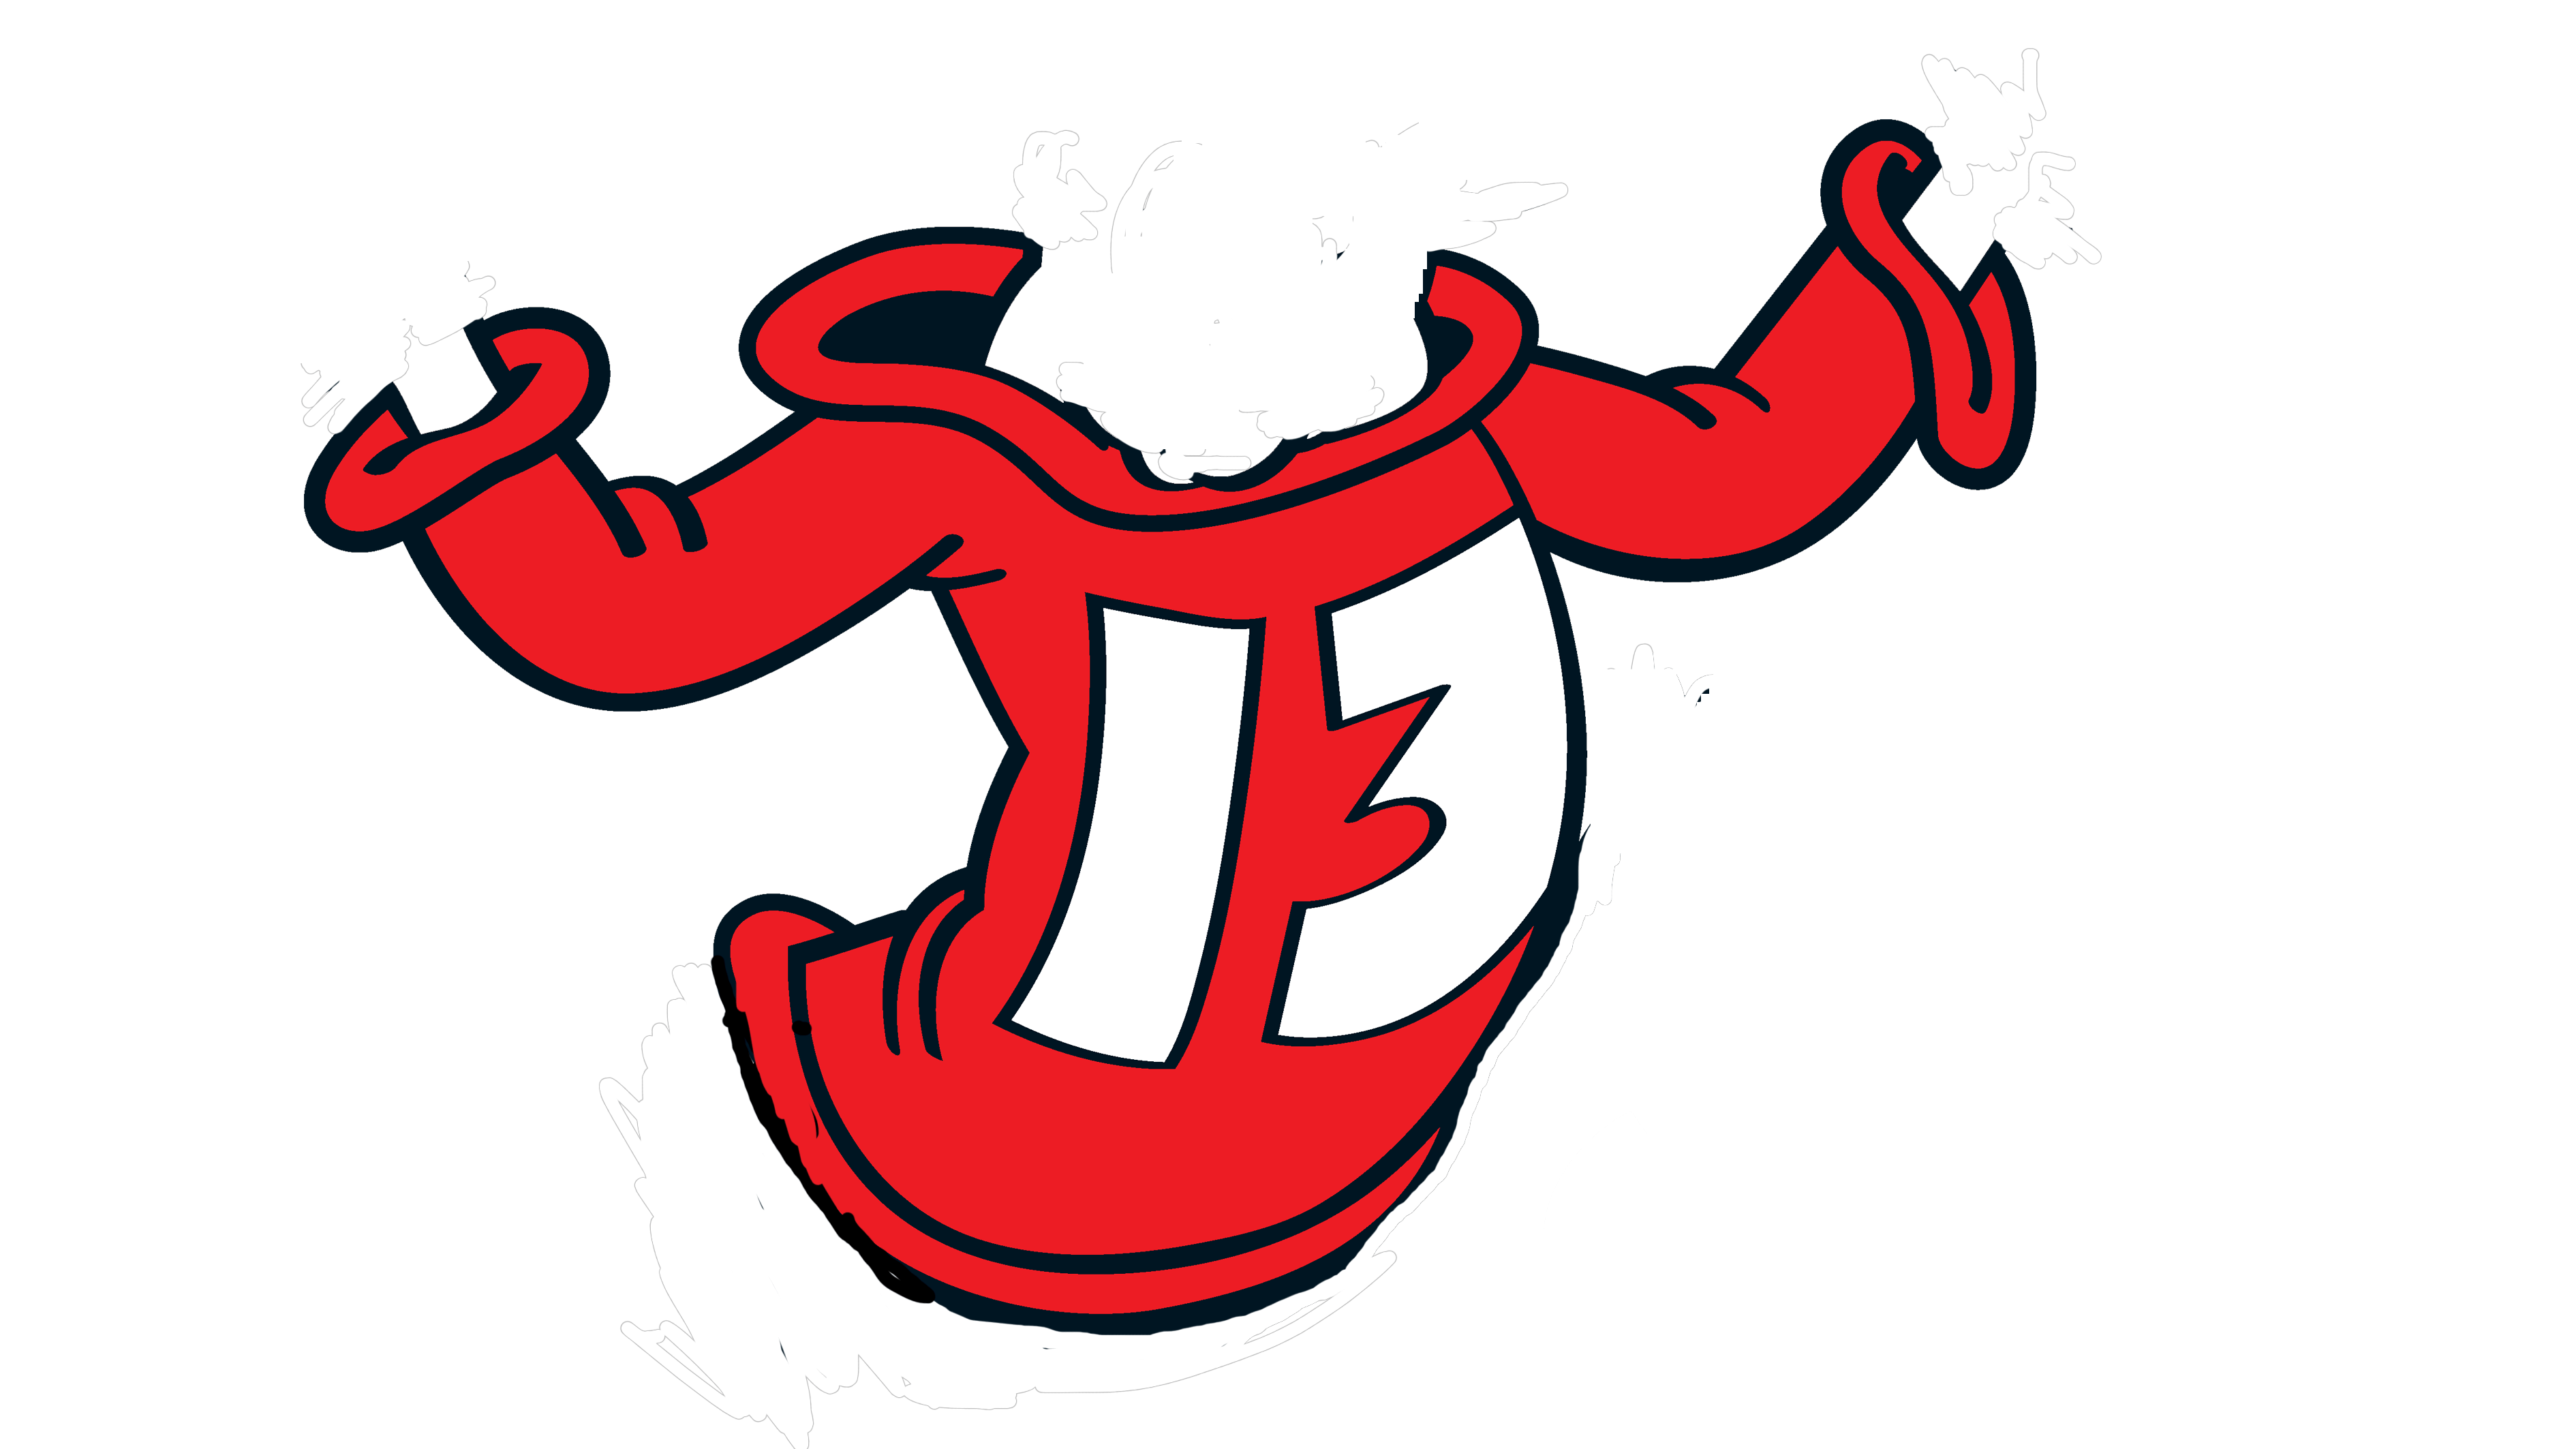 A red jersey with a number 13